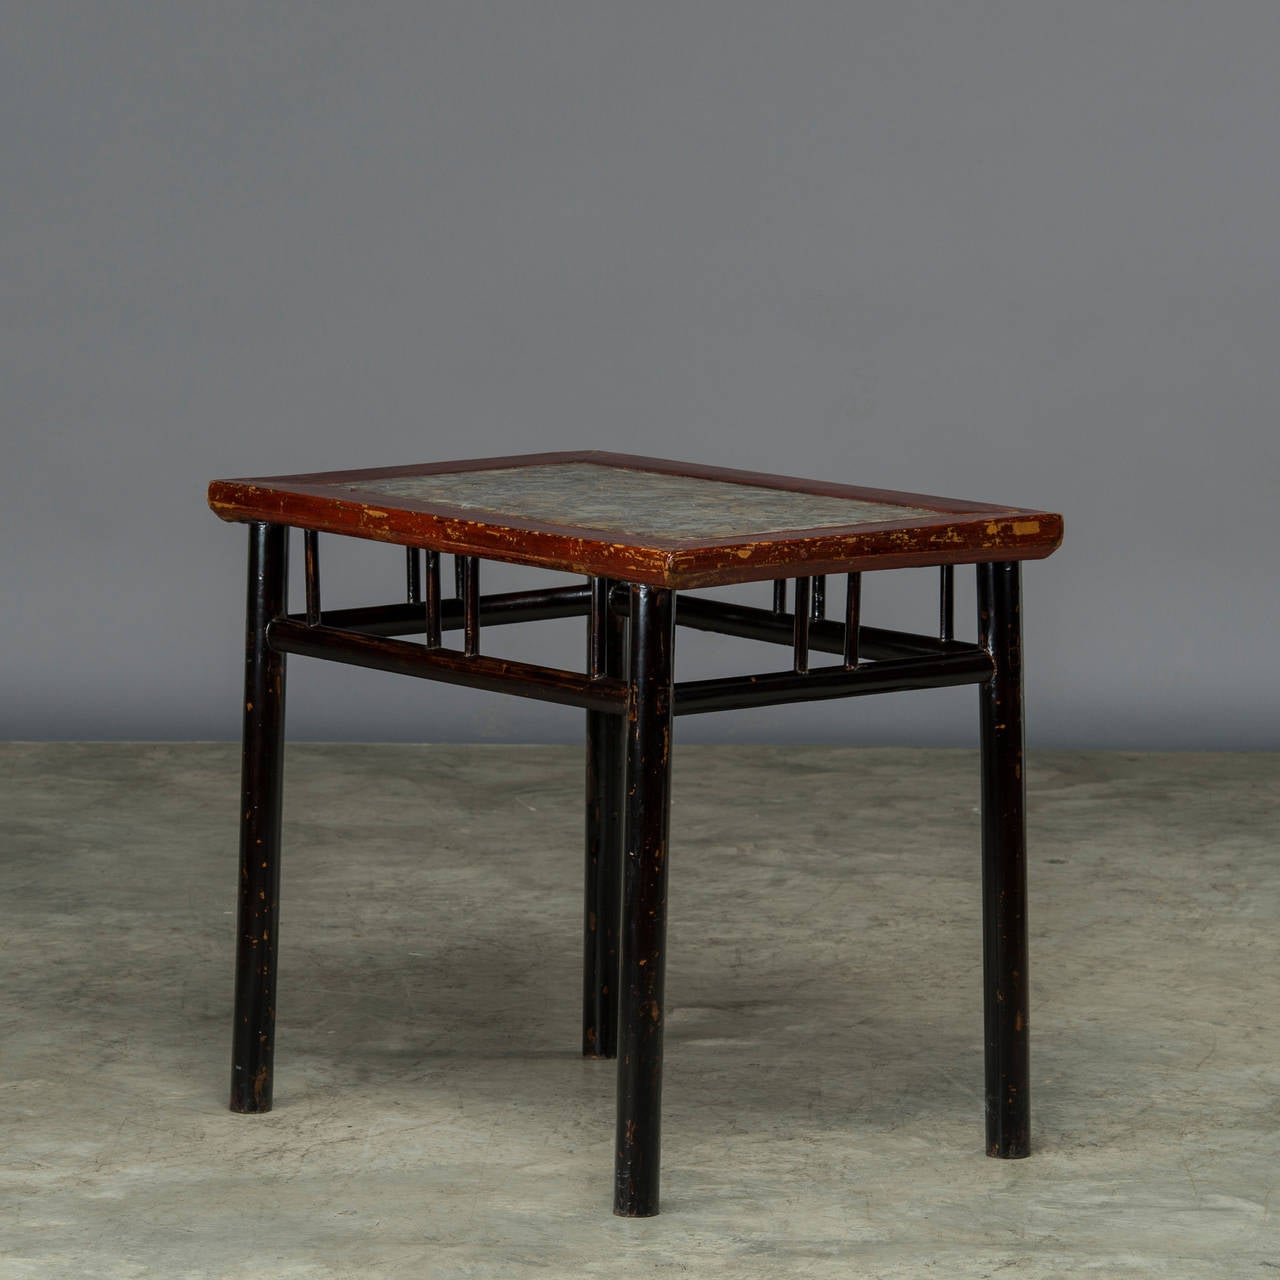 Wine table in original black and red lacquer with stone top inlay. 
Occur with original patina and beautiful finish,
Jiangsu, 1820-1840.